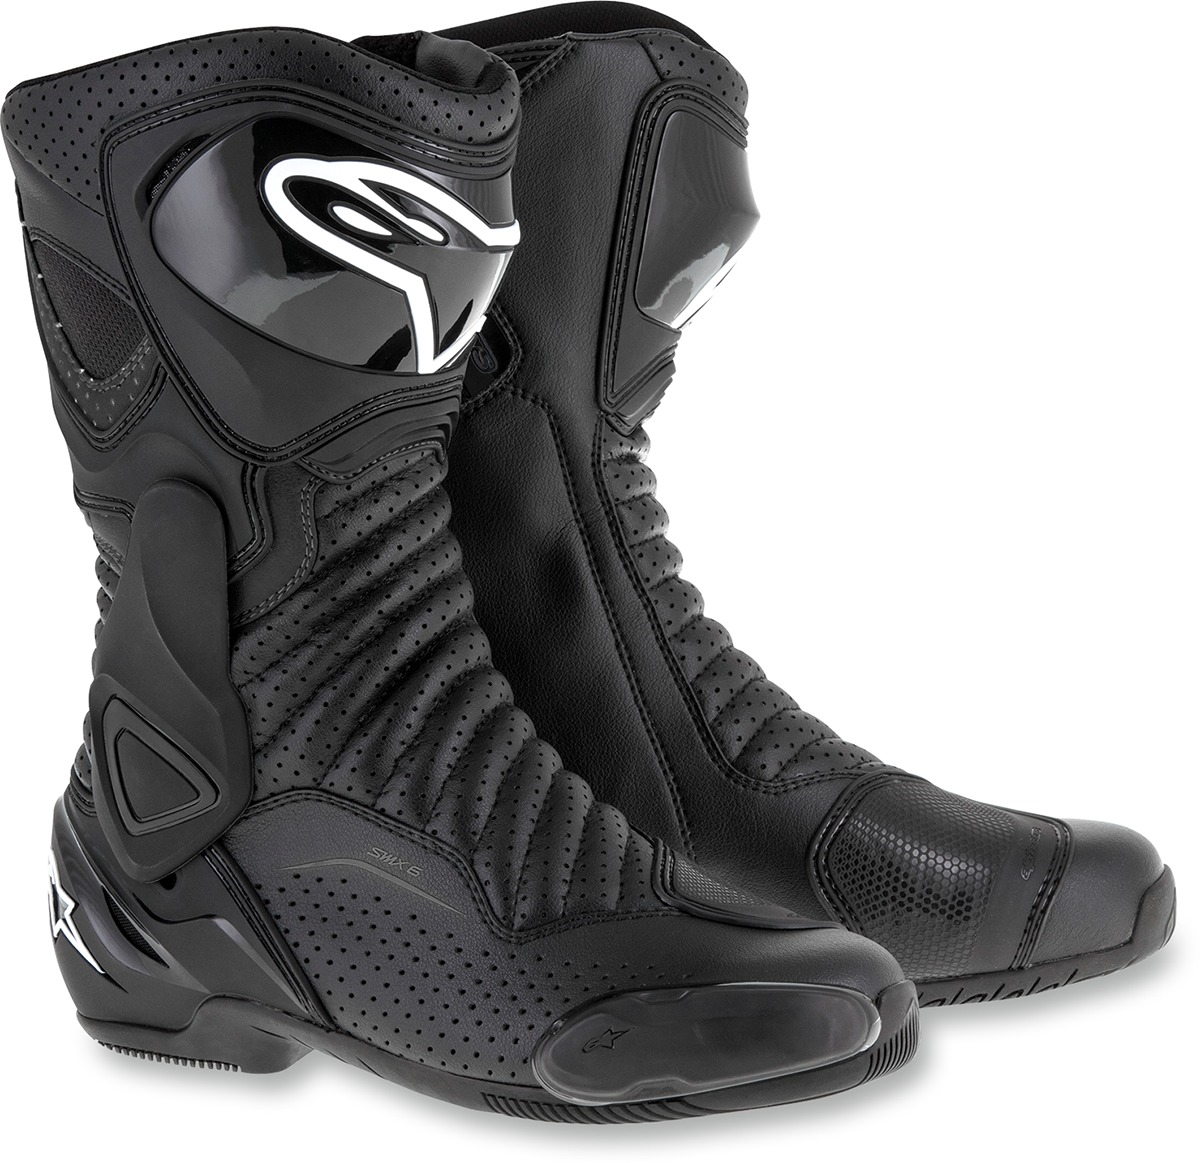 SMX-6v2 Vented Street Riding Boots Black US 14 - Click Image to Close